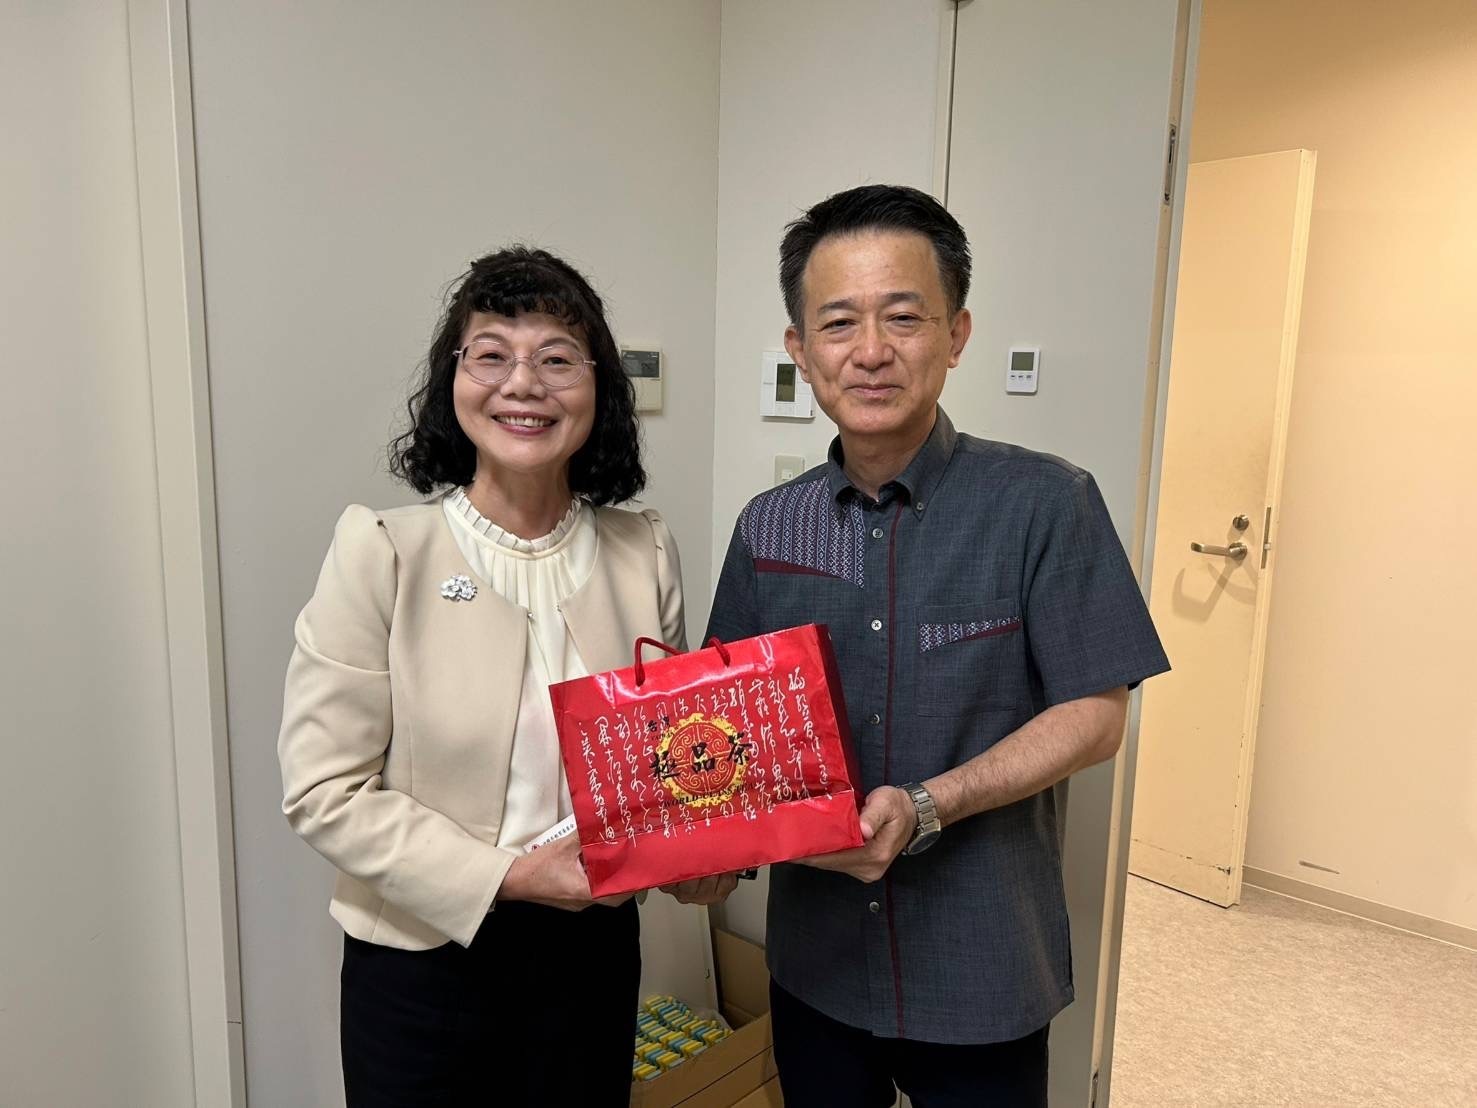 The president of the National University of Kaohsiung (NUK), Yueh-Tuan Chen, led a delegation to Japan, resulting in fruitful exchanges and accomplishments.013